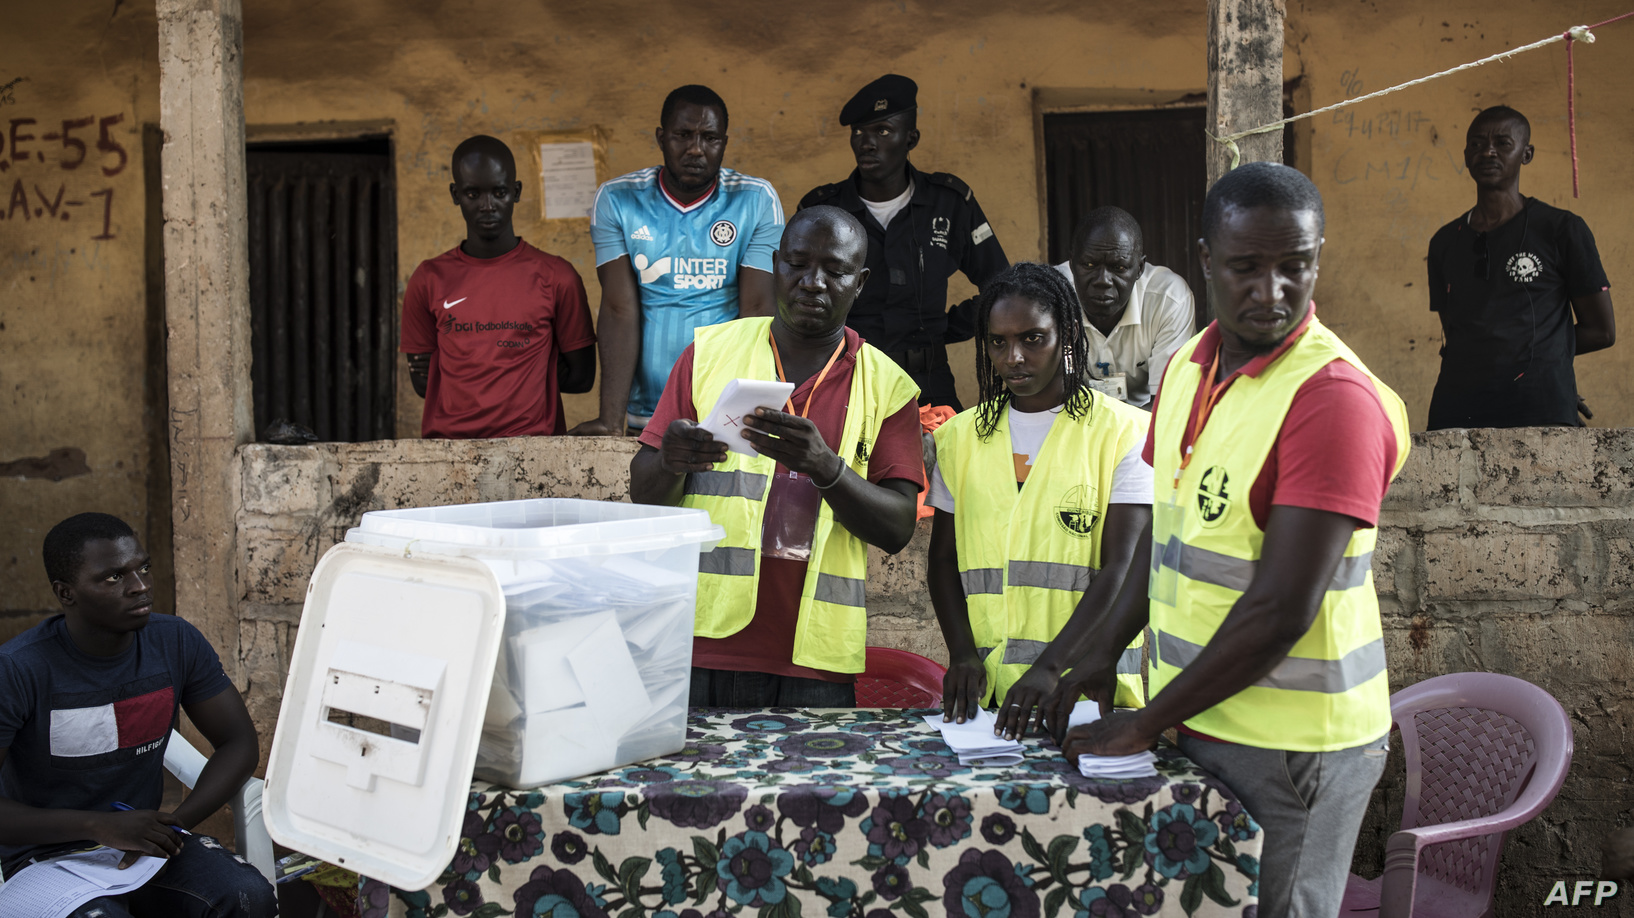 Guinea-Bissau awaits election results after 5 years of political turmoil